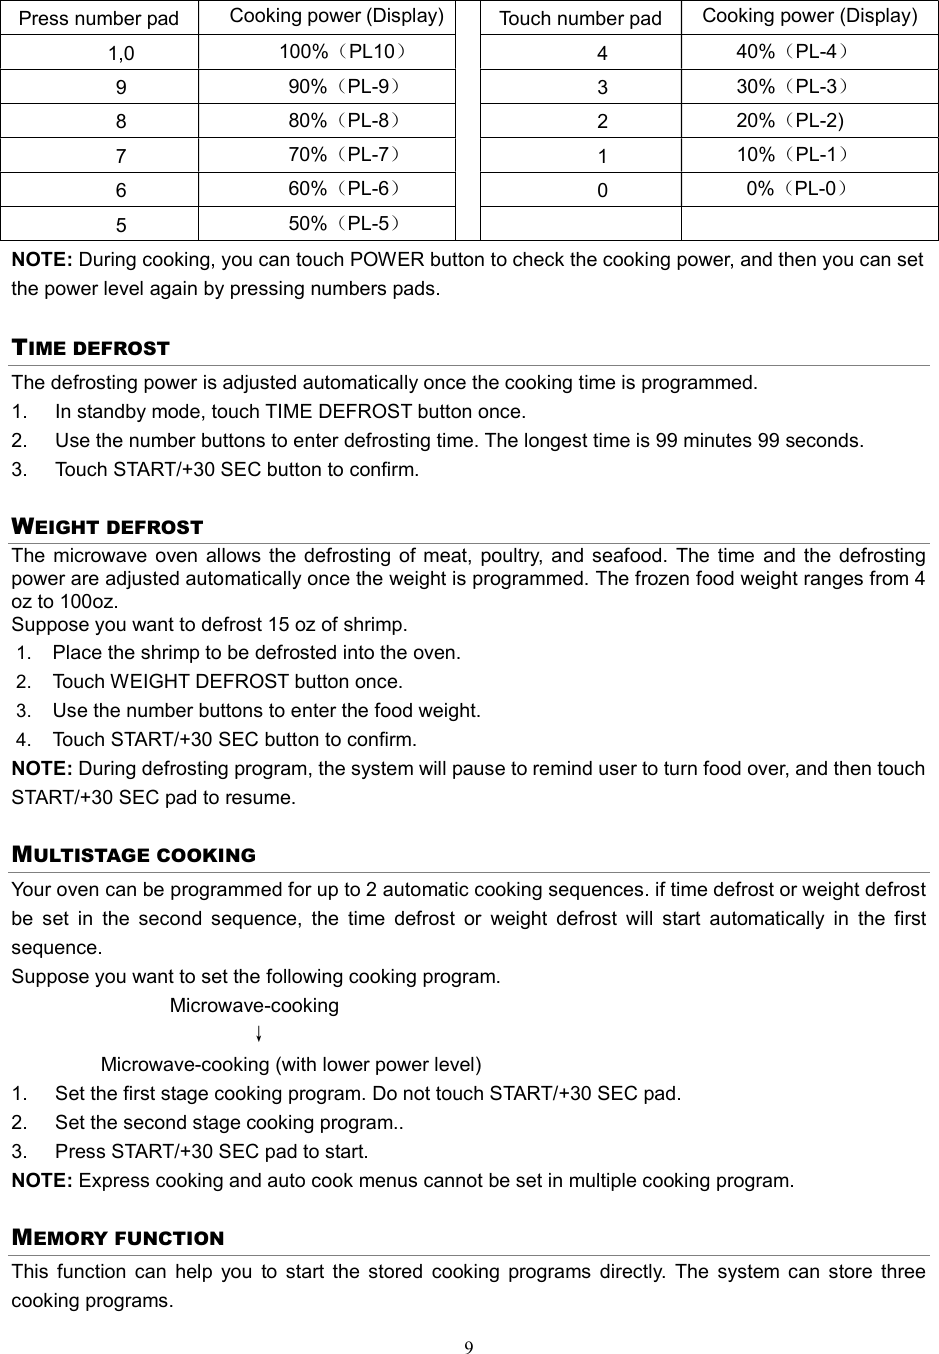 Page 9 of Galanz 7020007 Microwave Oven User Manual JS1M0609 23556 004